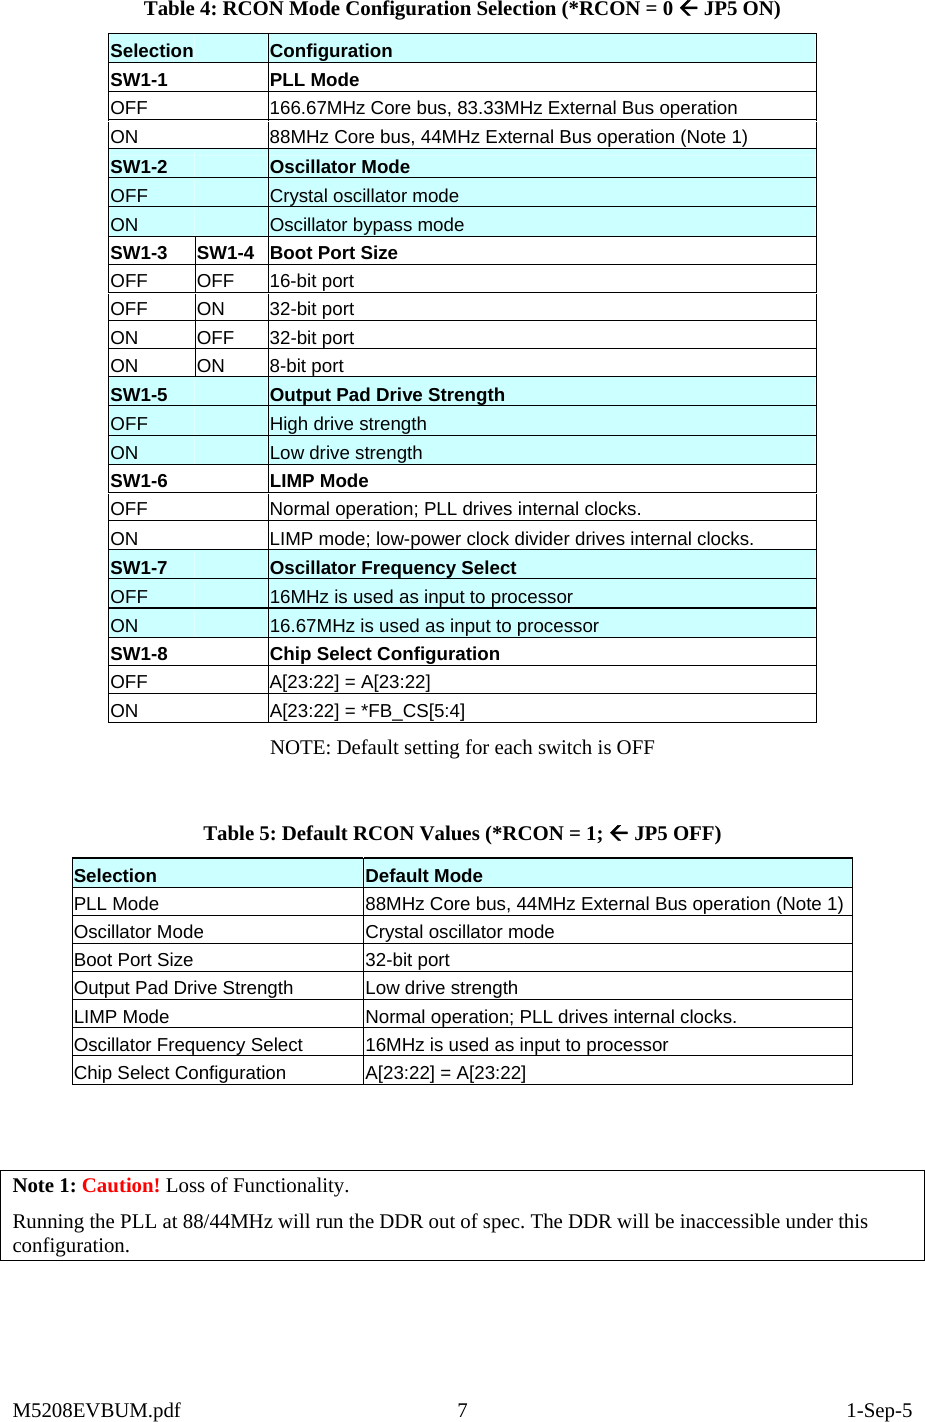  Table 4: RCON Mode Configuration Selection (*RCON = 0 Å JP5 ON) Selection  Configuration SW1-1     PLL Mode OFF    166.67MHz Core bus, 83.33MHz External Bus operation ON     88MHz Core bus, 44MHz External Bus operation (Note 1) SW1-2     Oscillator Mode OFF     Crystal oscillator mode ON     Oscillator bypass mode SW1-3  SW1-4  Boot Port Size OFF OFF 16-bit port OFF ON 32-bit port ON OFF 32-bit port ON ON 8-bit port SW1-5     Output Pad Drive Strength OFF     High drive strength ON     Low drive strength SW1-6     LIMP Mode OFF     Normal operation; PLL drives internal clocks. ON     LIMP mode; low-power clock divider drives internal clocks. SW1-7     Oscillator Frequency Select OFF     16MHz is used as input to processor ON     16.67MHz is used as input to processor SW1-8     Chip Select Configuration OFF     A[23:22] = A[23:22] ON     A[23:22] = *FB_CS[5:4] NOTE: Default setting for each switch is OFF  Table 5: Default RCON Values (*RCON = 1; Å JP5 OFF) Selection  Default Mode PLL Mode   88MHz Core bus, 44MHz External Bus operation (Note 1) Oscillator Mode  Crystal oscillator mode Boot Port Size  32-bit port Output Pad Drive Strength  Low drive strength LIMP Mode  Normal operation; PLL drives internal clocks. Oscillator Frequency Select  16MHz is used as input to processor Chip Select Configuration  A[23:22] = A[23:22]   Note 1: Caution! Loss of Functionality.   Running the PLL at 88/44MHz will run the DDR out of spec. The DDR will be inaccessible under this configuration.     M5208EVBUM.pdf 7  1-Sep-5 